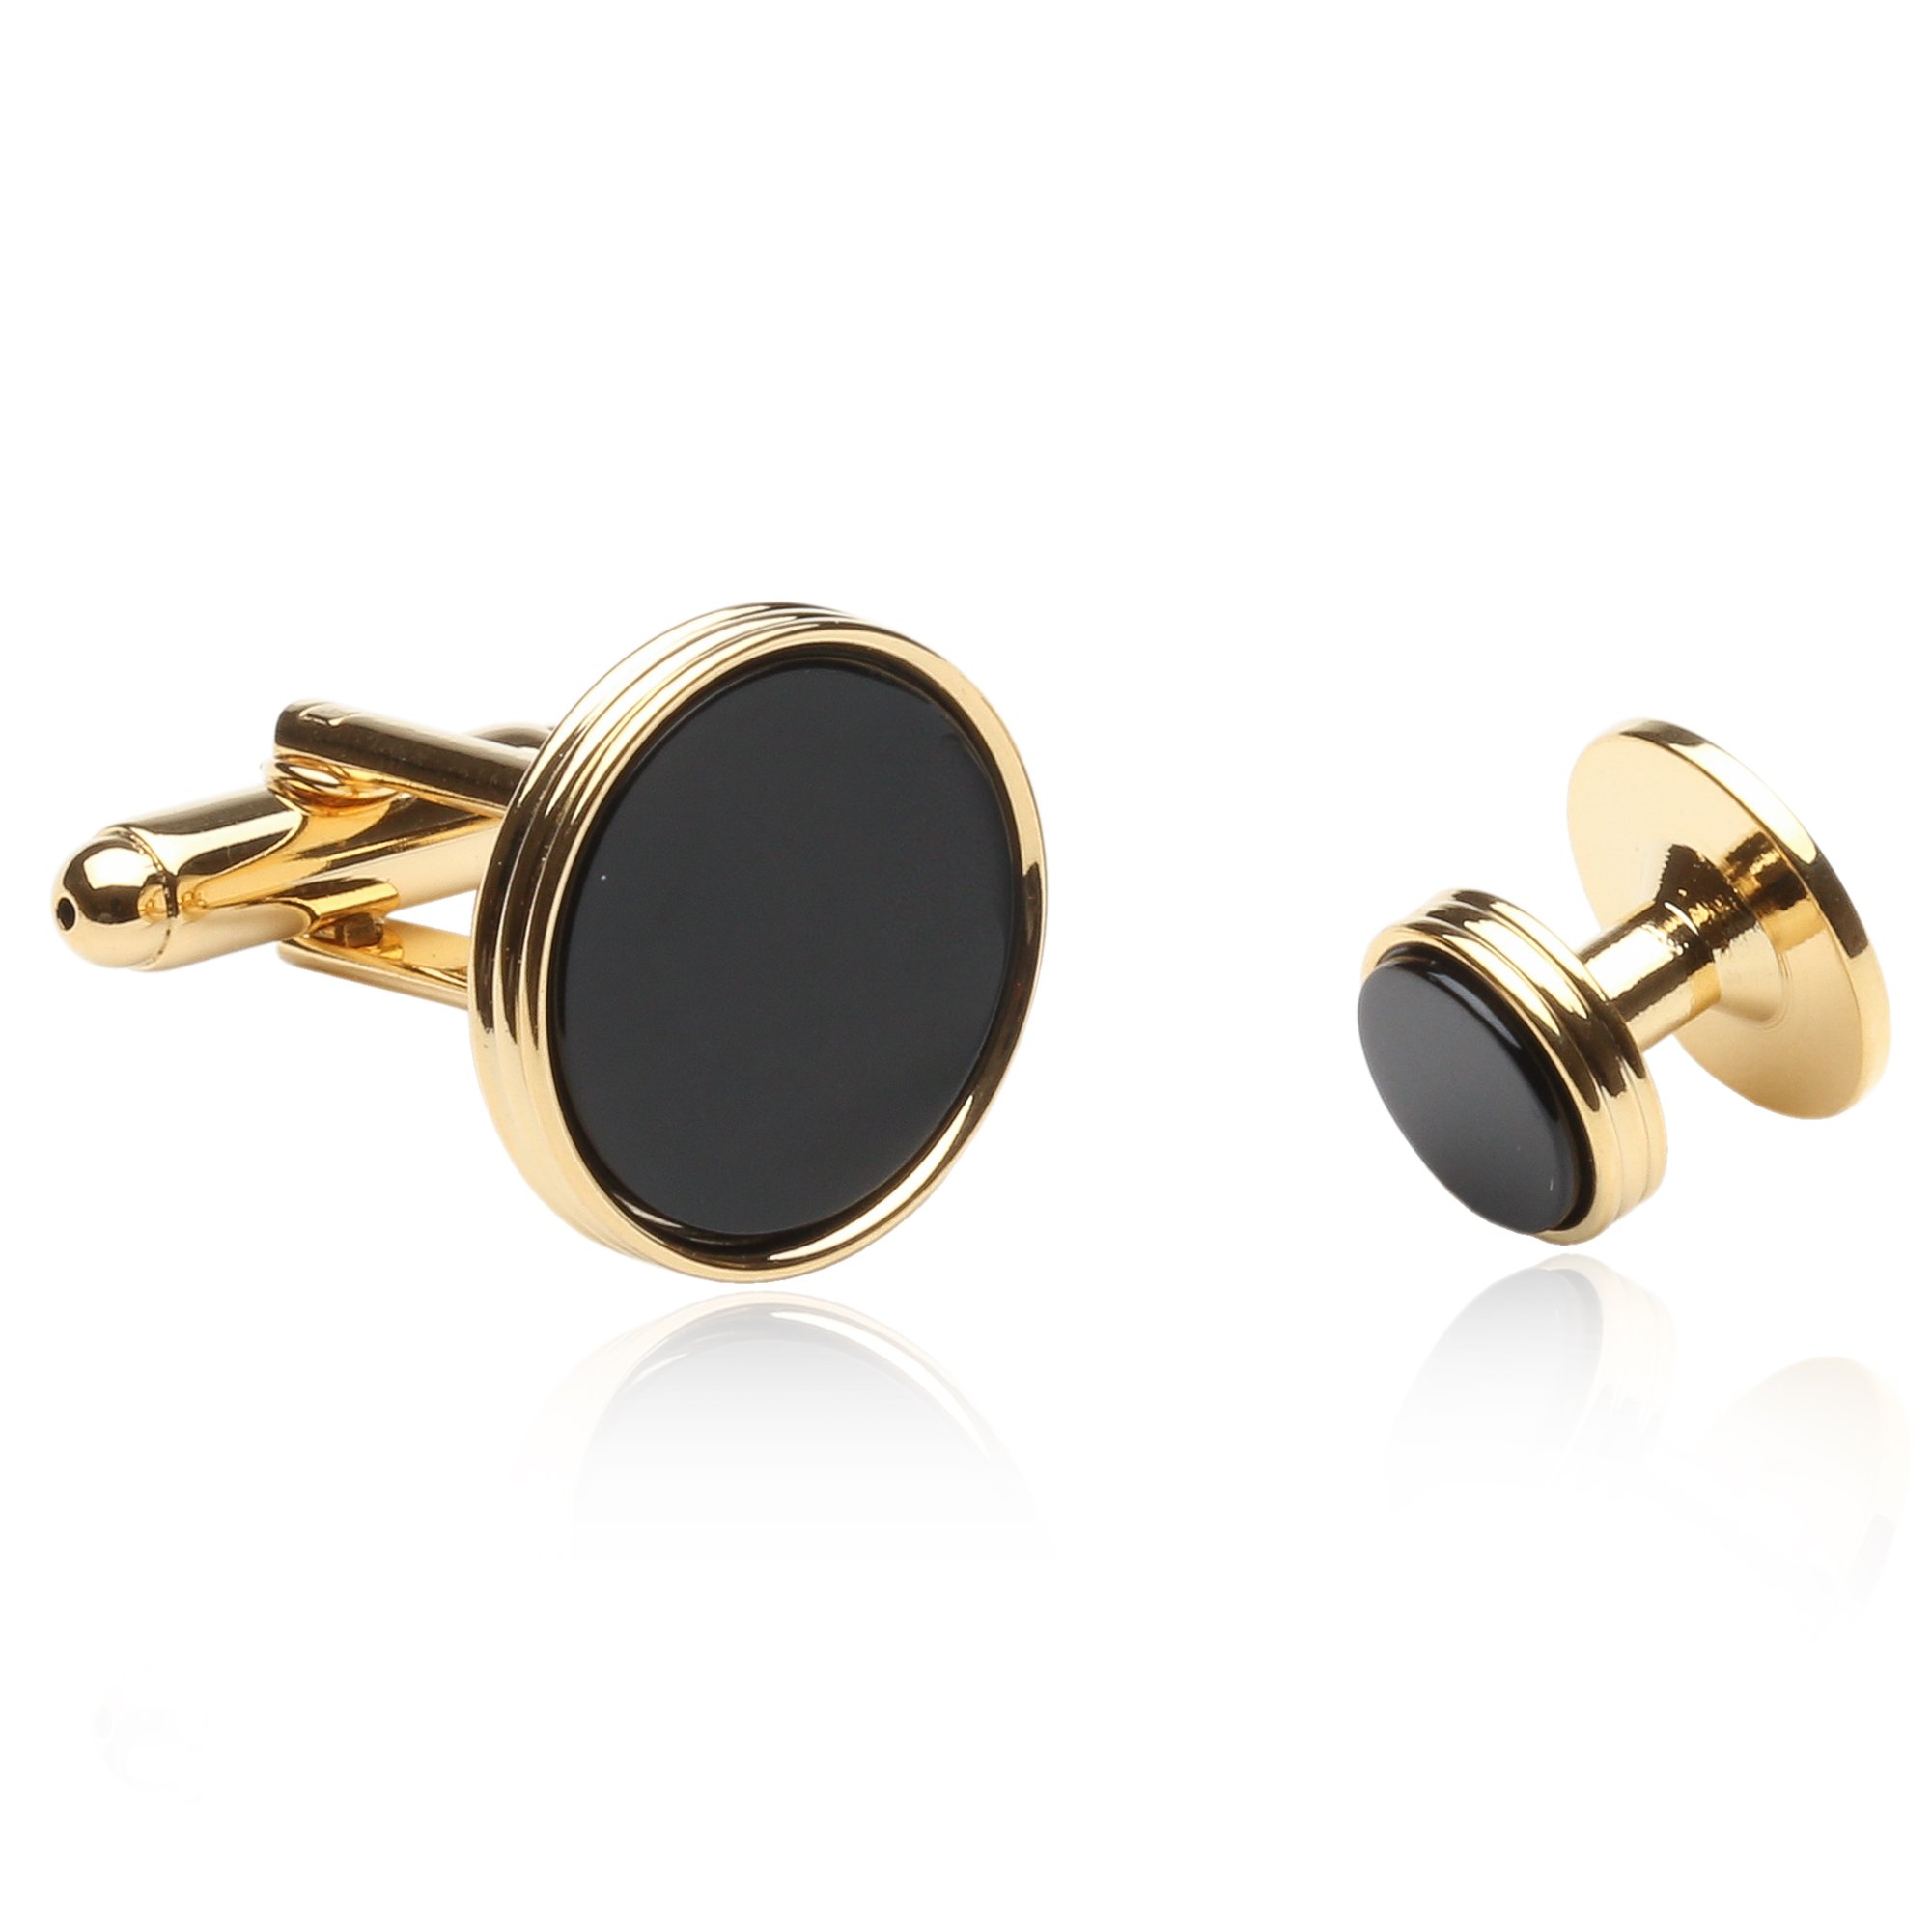 Cuff-Daddy Black Onyx and Gold Tone Cufflinks and Studs with Presentation Box Unique Men Cufflinks for Wedding Anniversary Special Occasions Jewelry Presentation Box